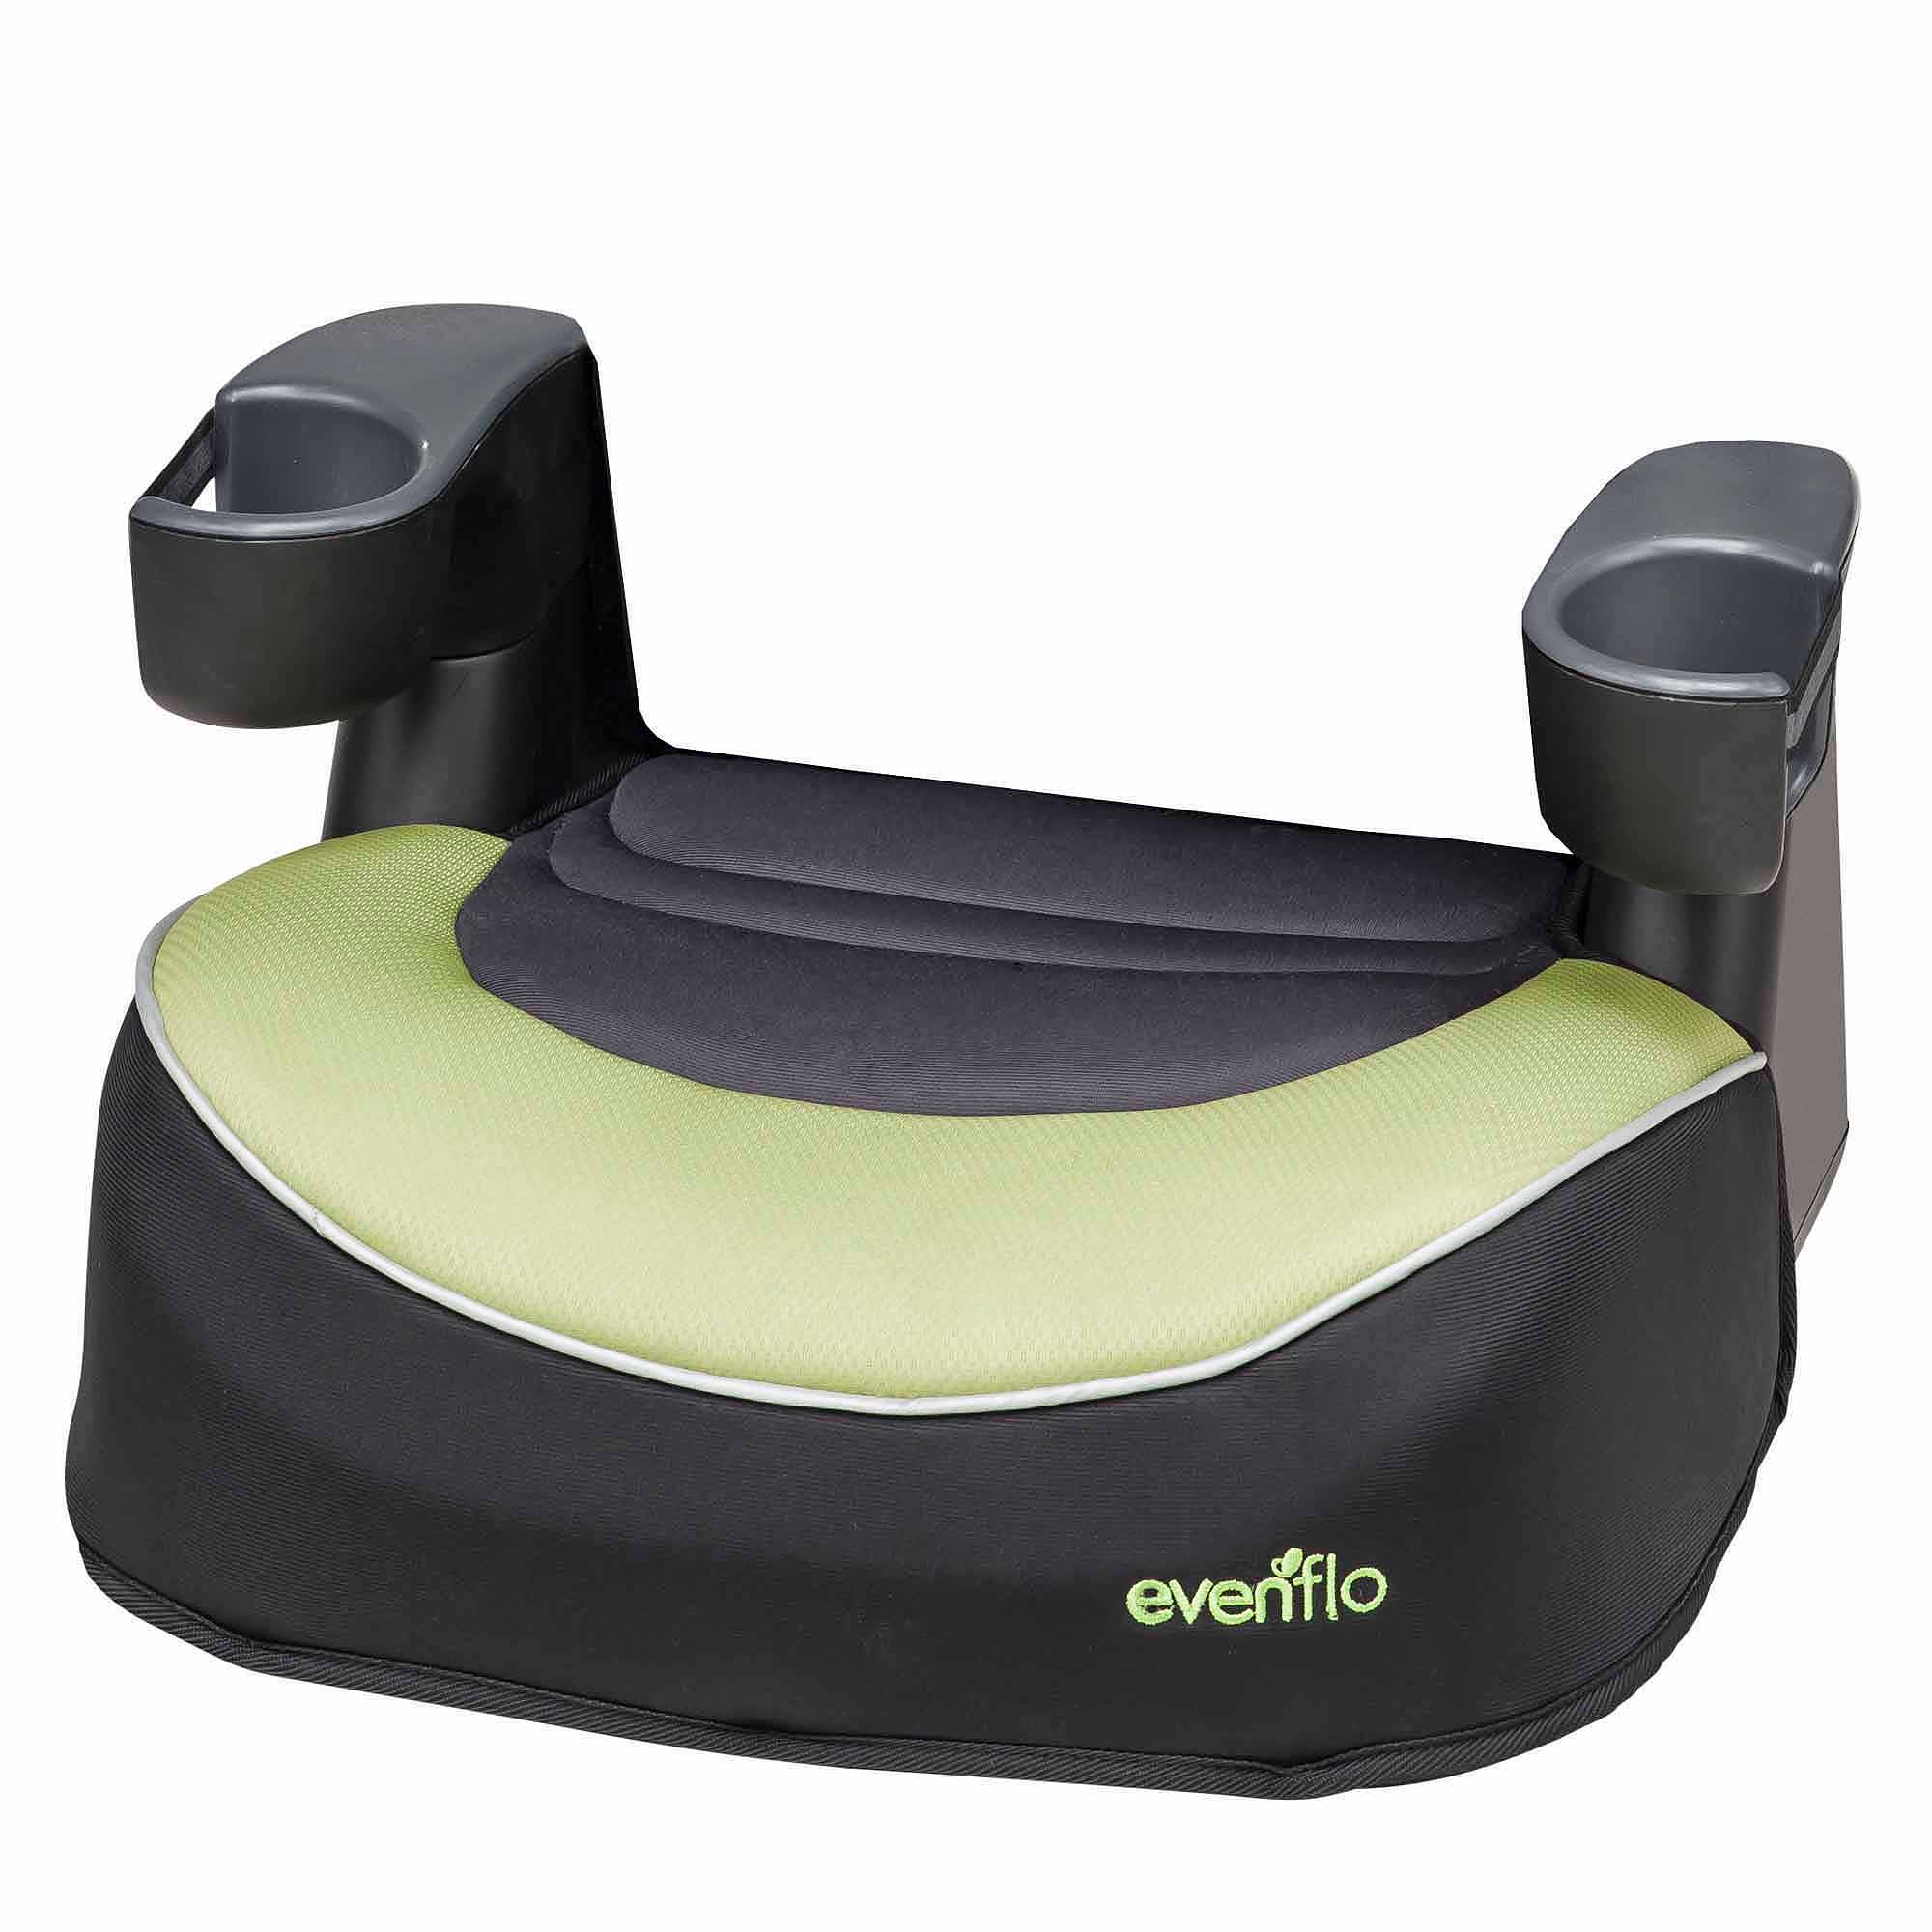 Evenflo Big Kid Lx Booster Seat, Polo - image 3 of 10